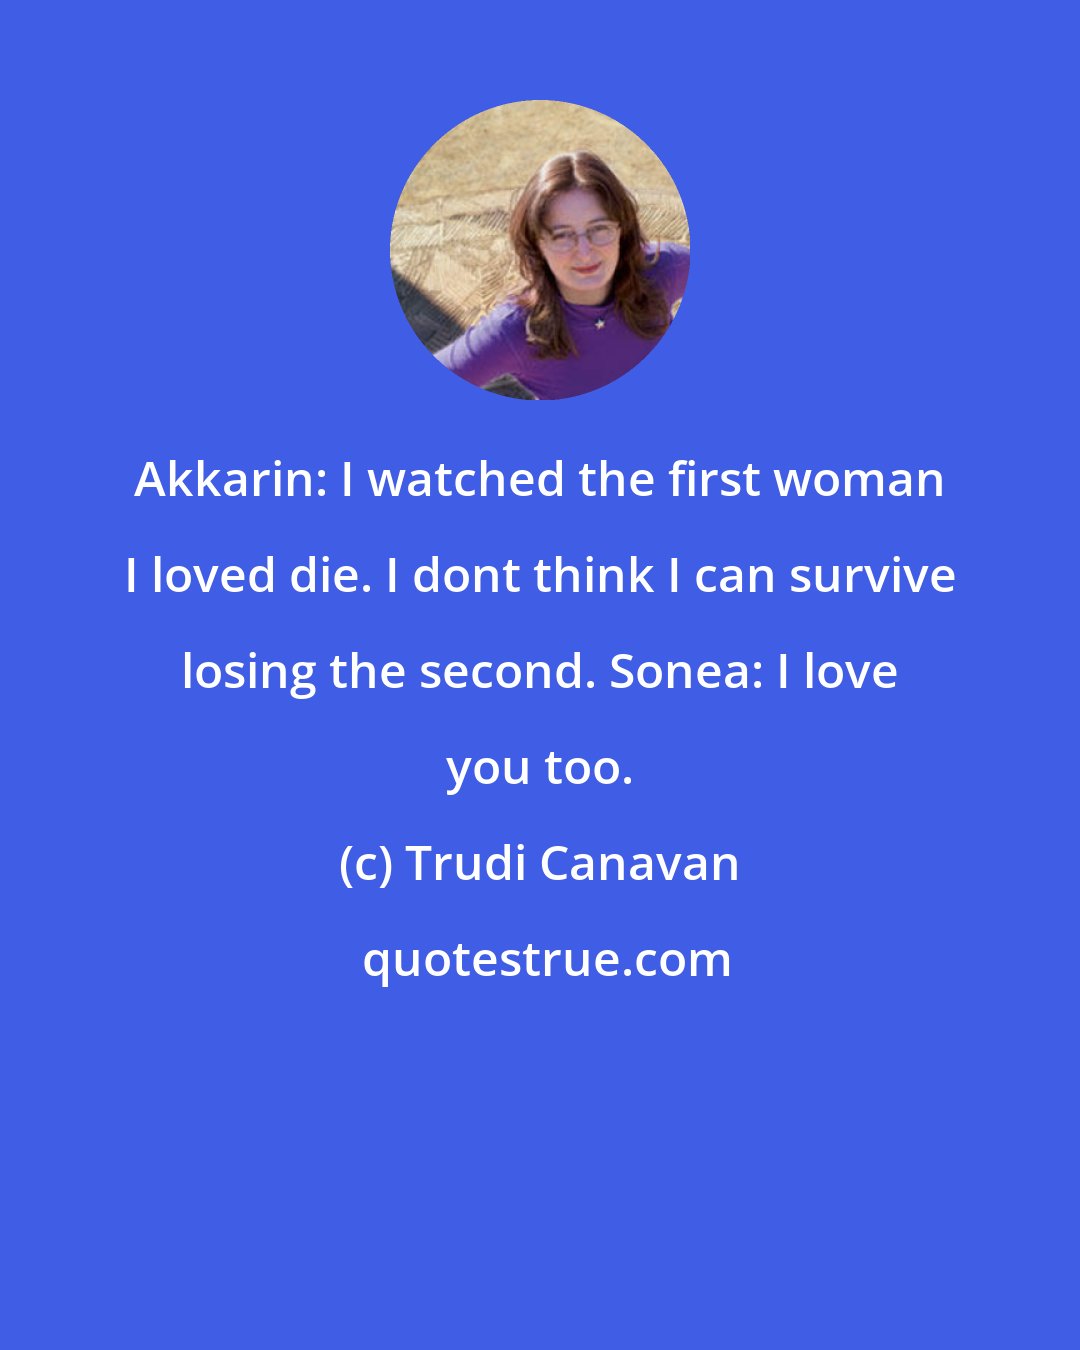 Trudi Canavan: Akkarin: I watched the first woman I loved die. I dont think I can survive losing the second. Sonea: I love you too.